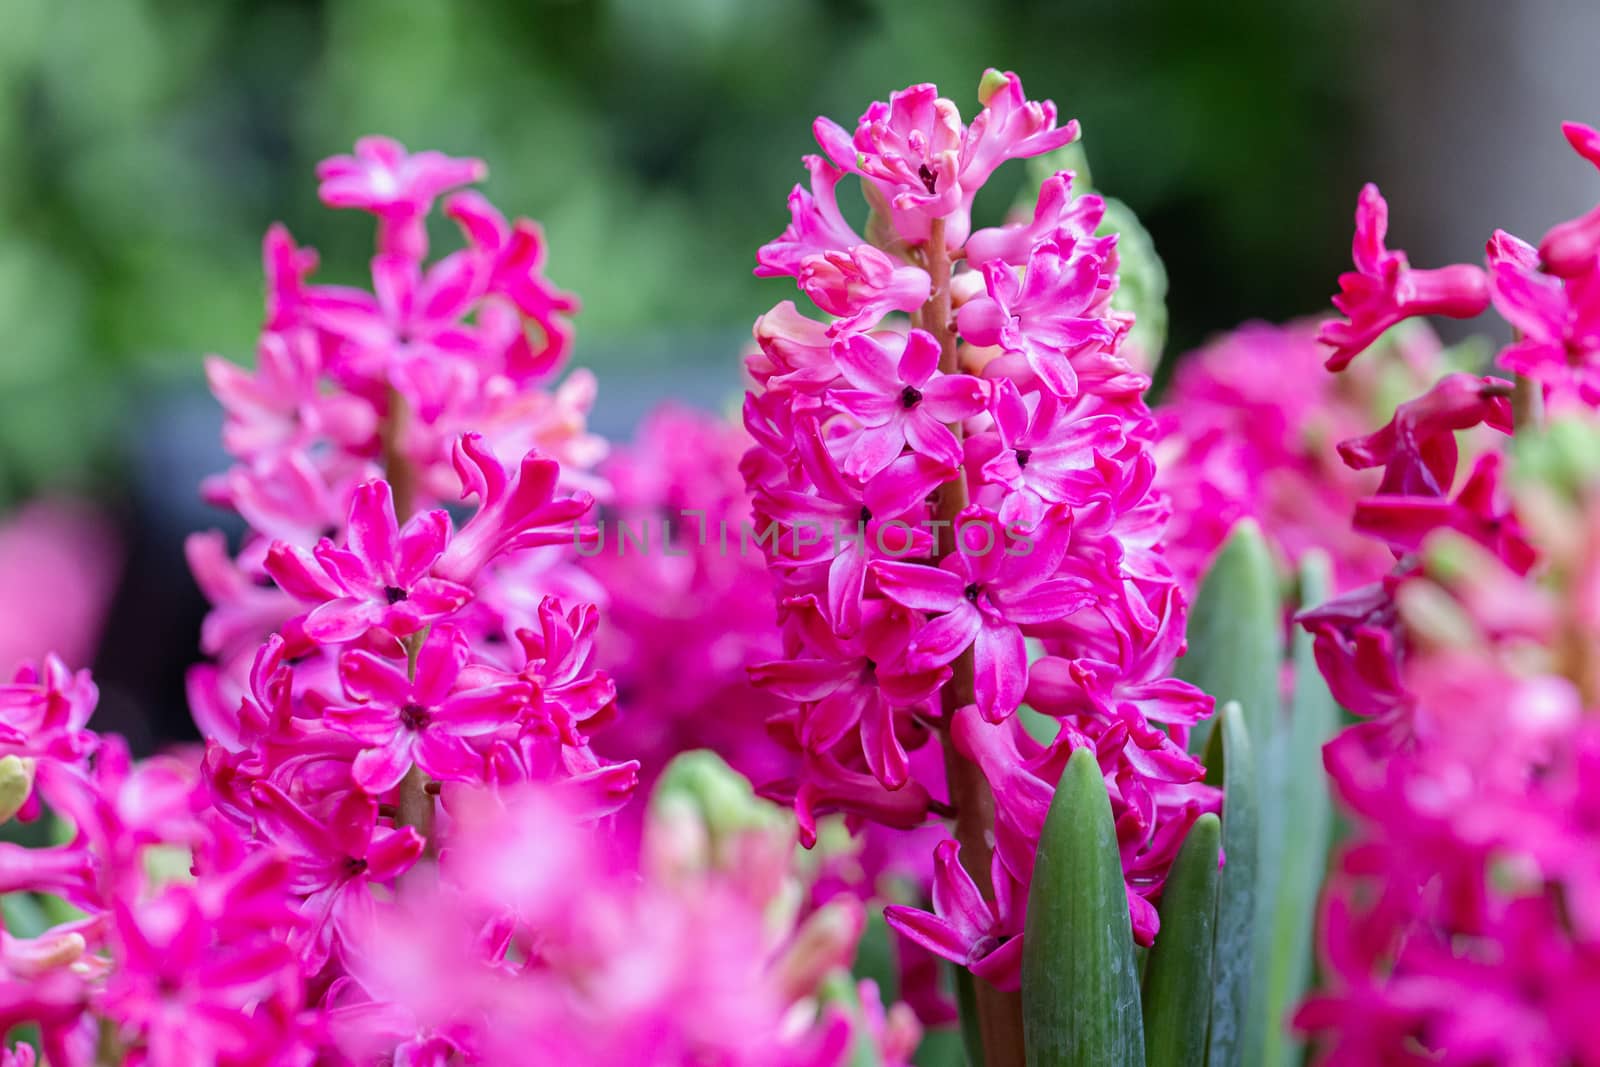 Hyacinth flower in garden at sunny summer or spring day for decoration.